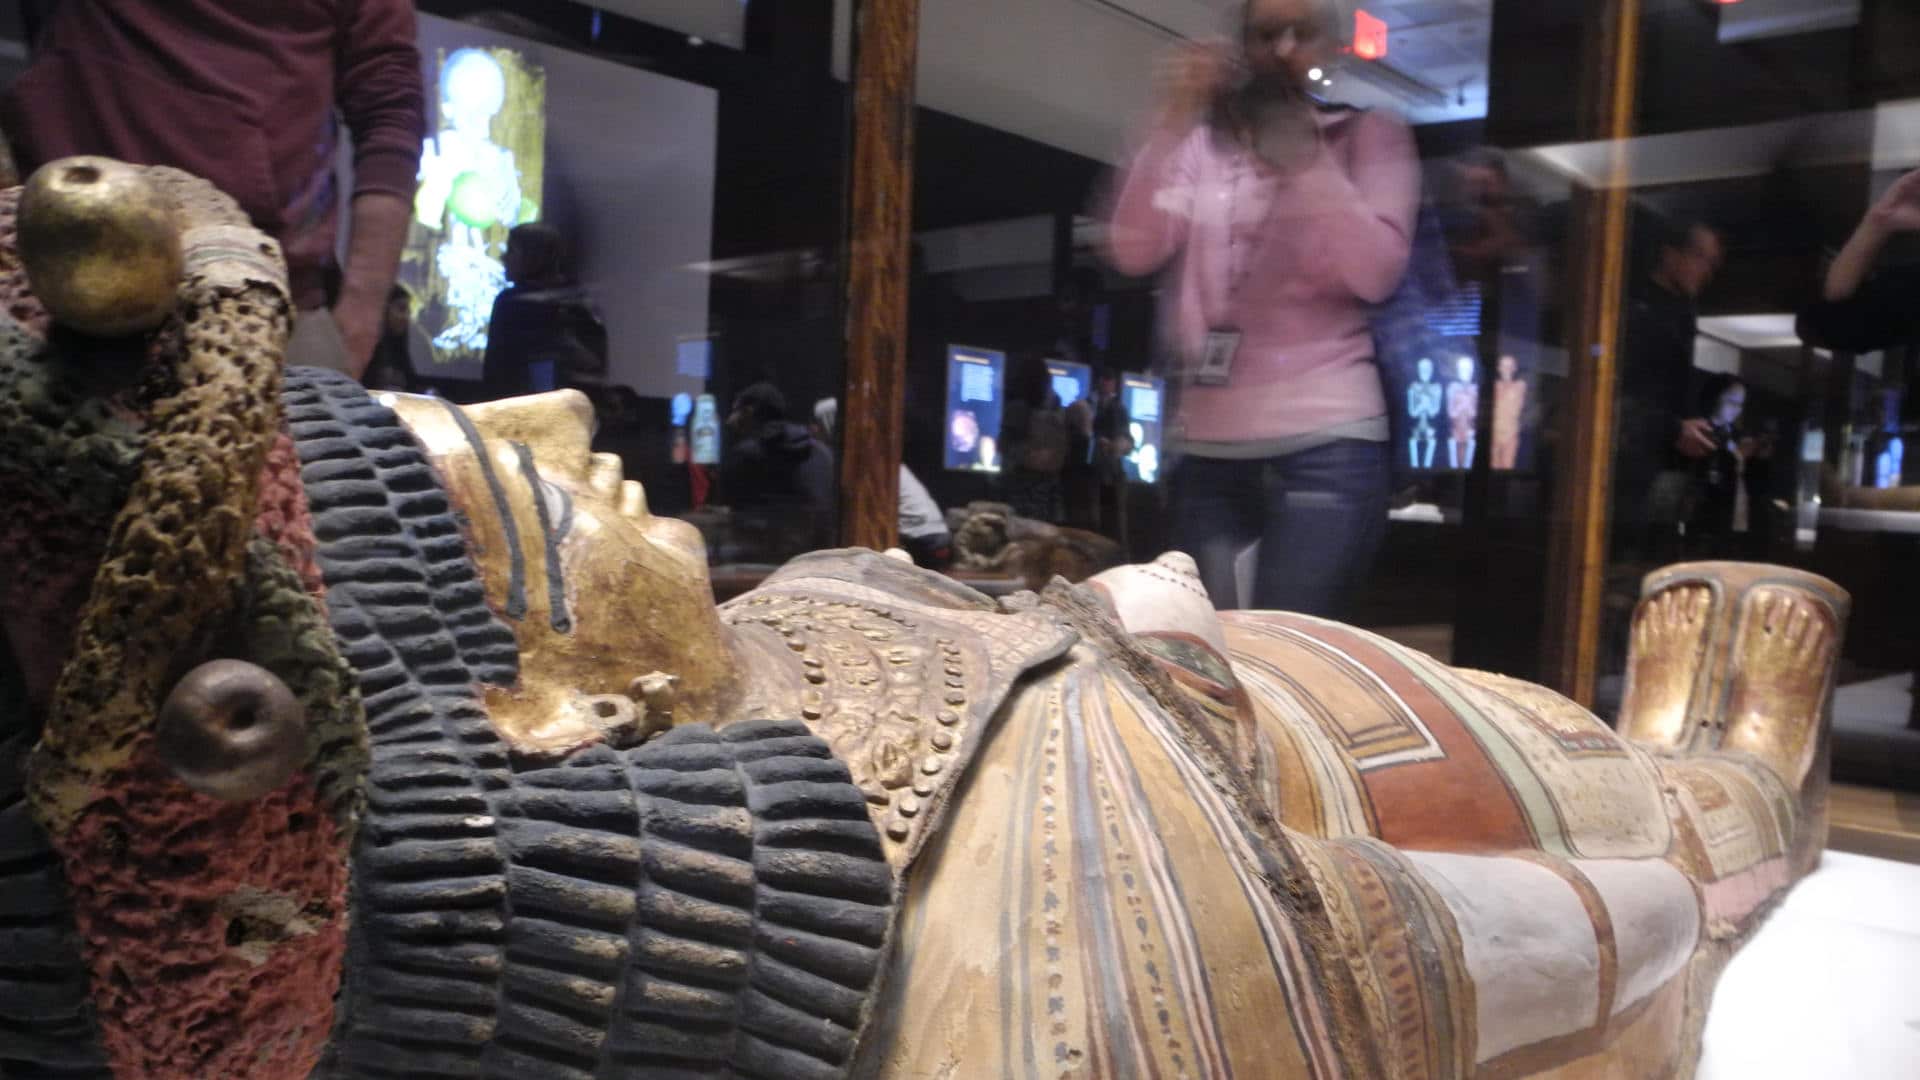 A visitor photographs a casket lid from ancient Egypt at the exhibition "Mummies" in the American Museum of Natural History in New York, March 2017.